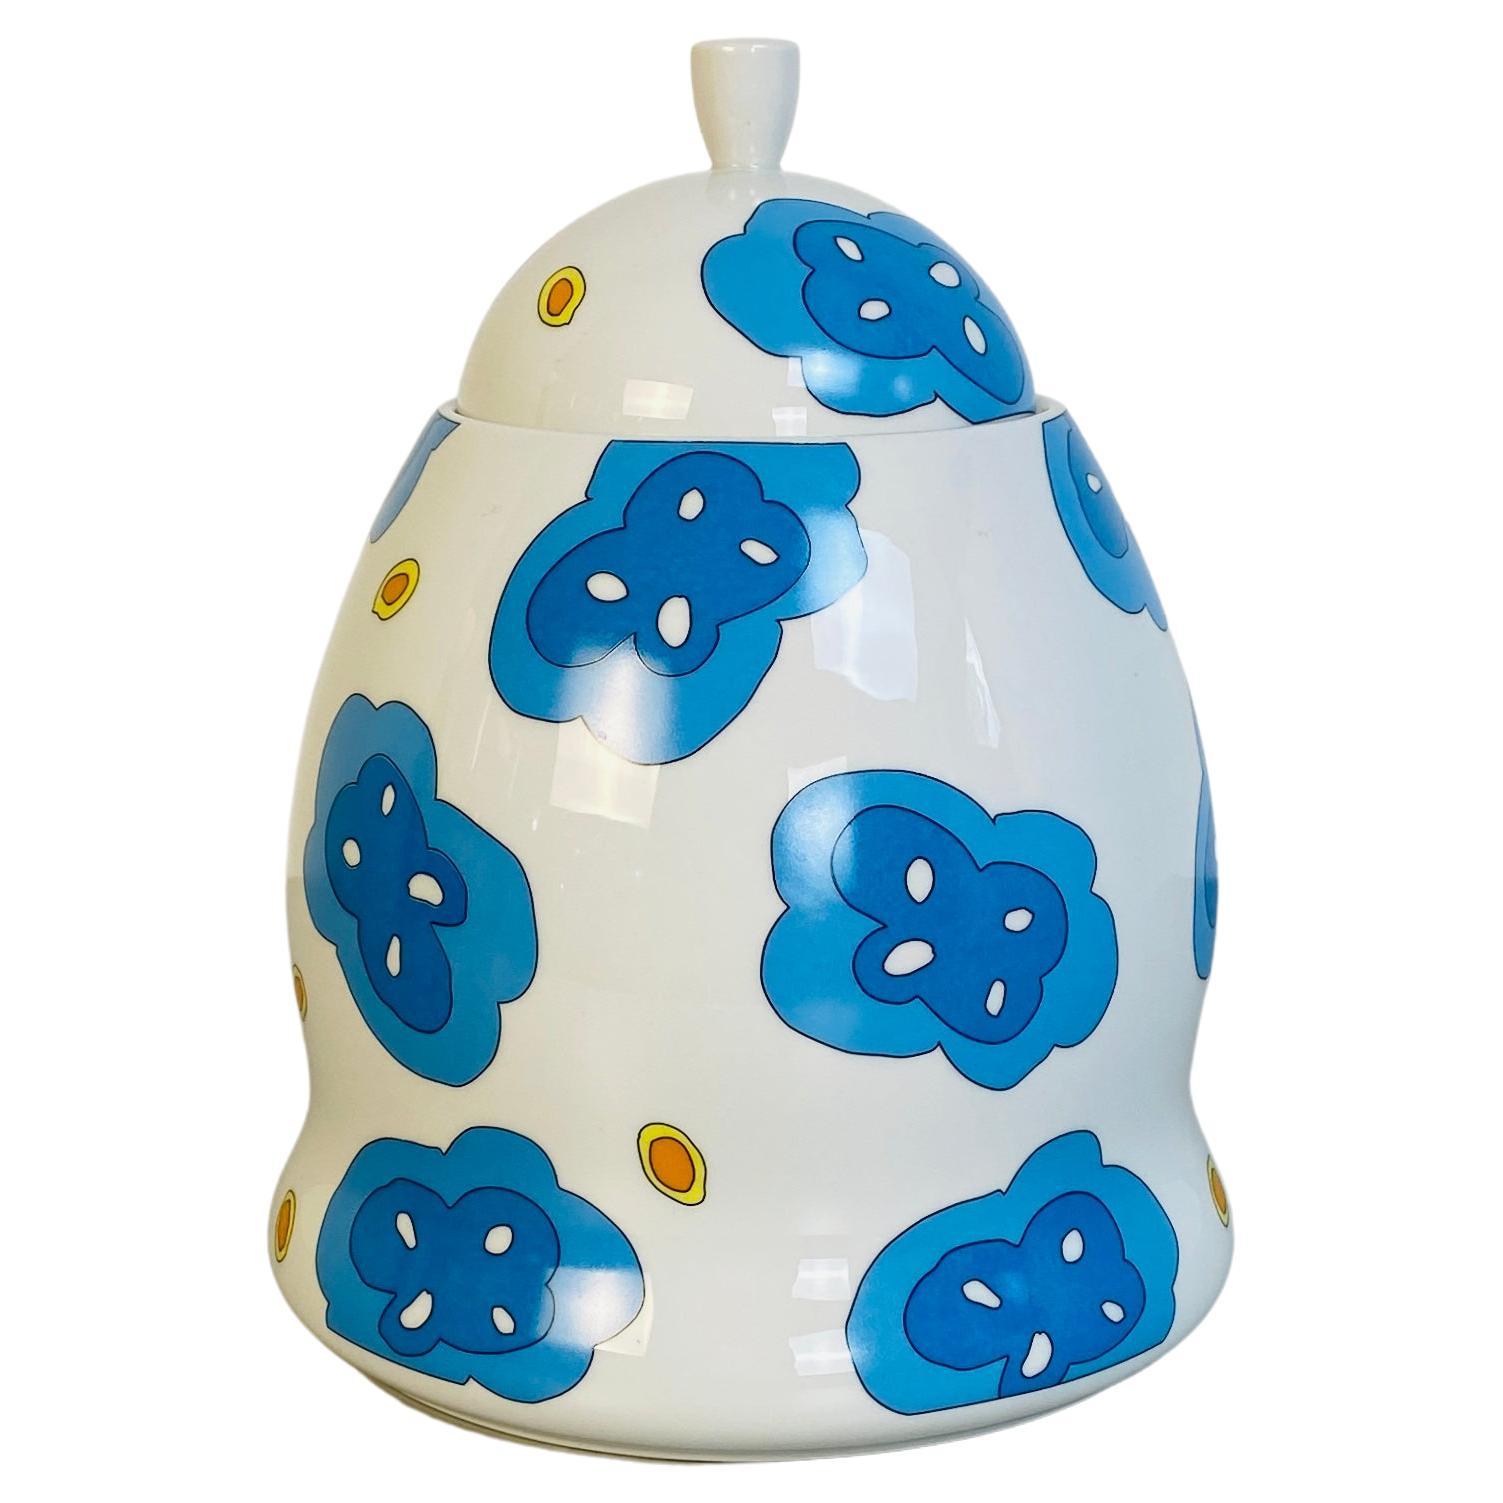 Italian Jaia Biscuit jar by George Sowden and Alice Fiorilli for Alessi, 1997 For Sale